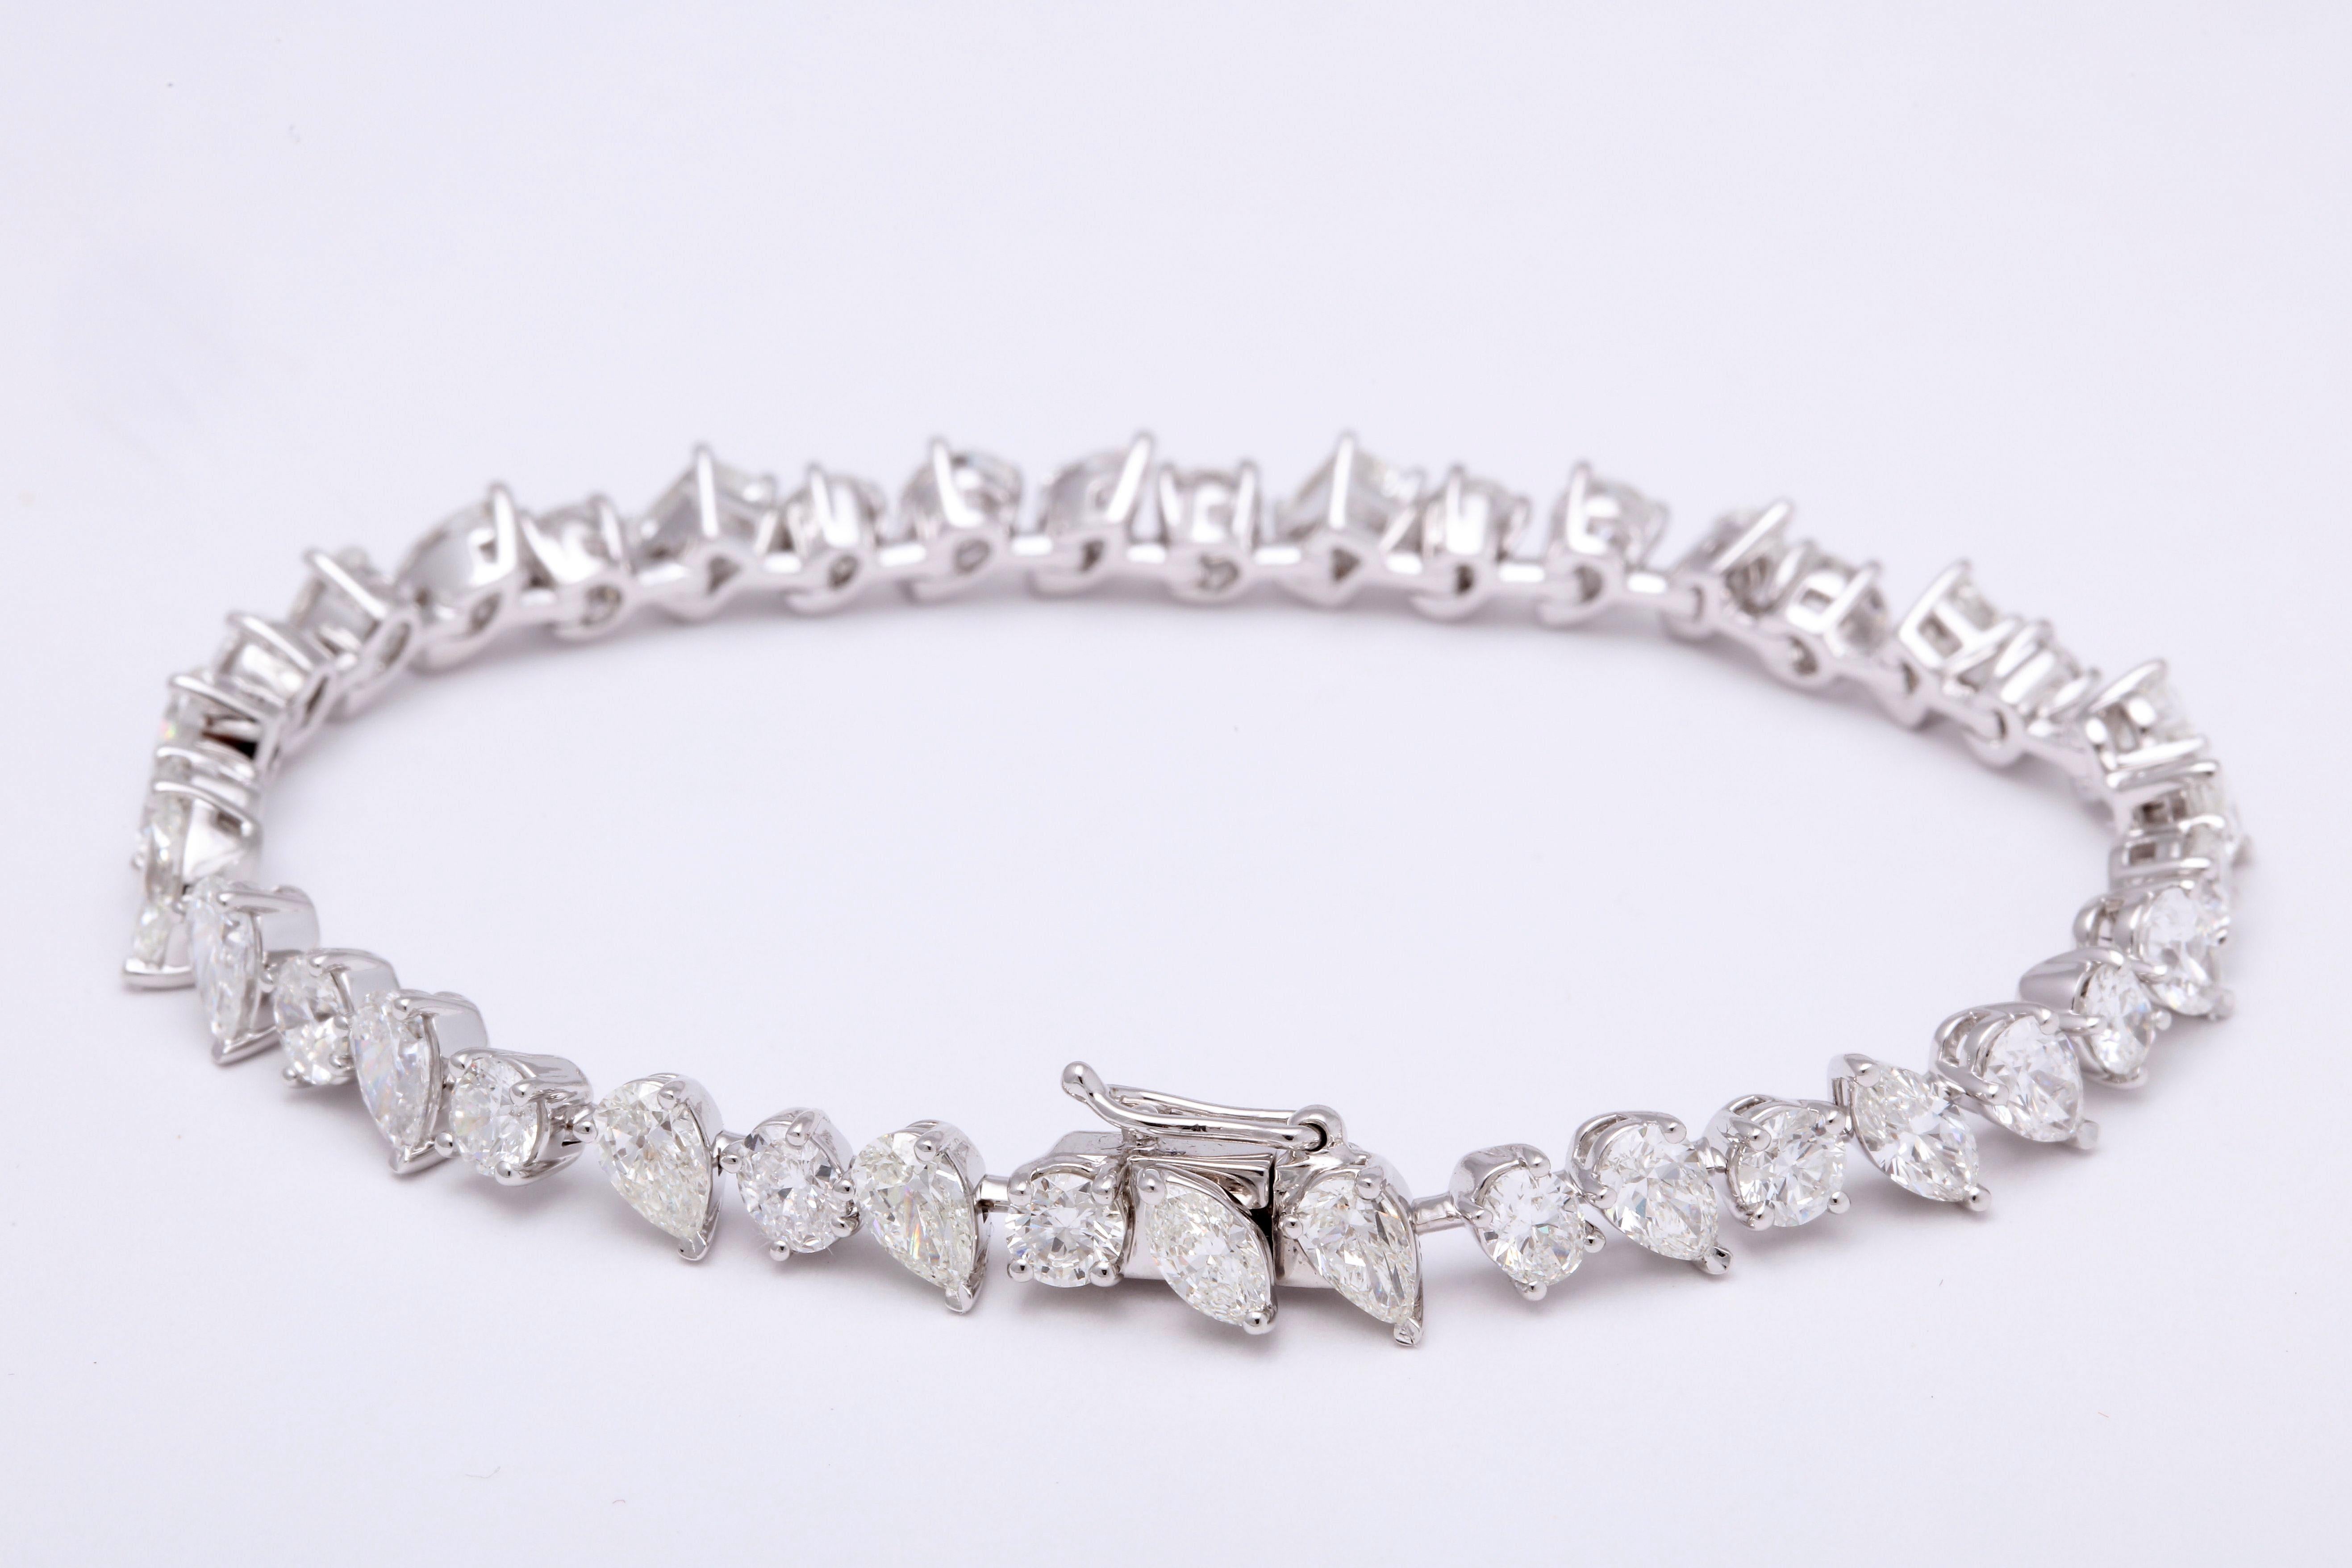 
A beautiful and unique tennis bracelet!

Gorgeous on its own and stacked with other bracelets.

10.07 carats of white diamonds set in 18k white gold.

The bracelet features round, pear, oval, marquise and emerald cut diamonds. 

6.75 inch length 